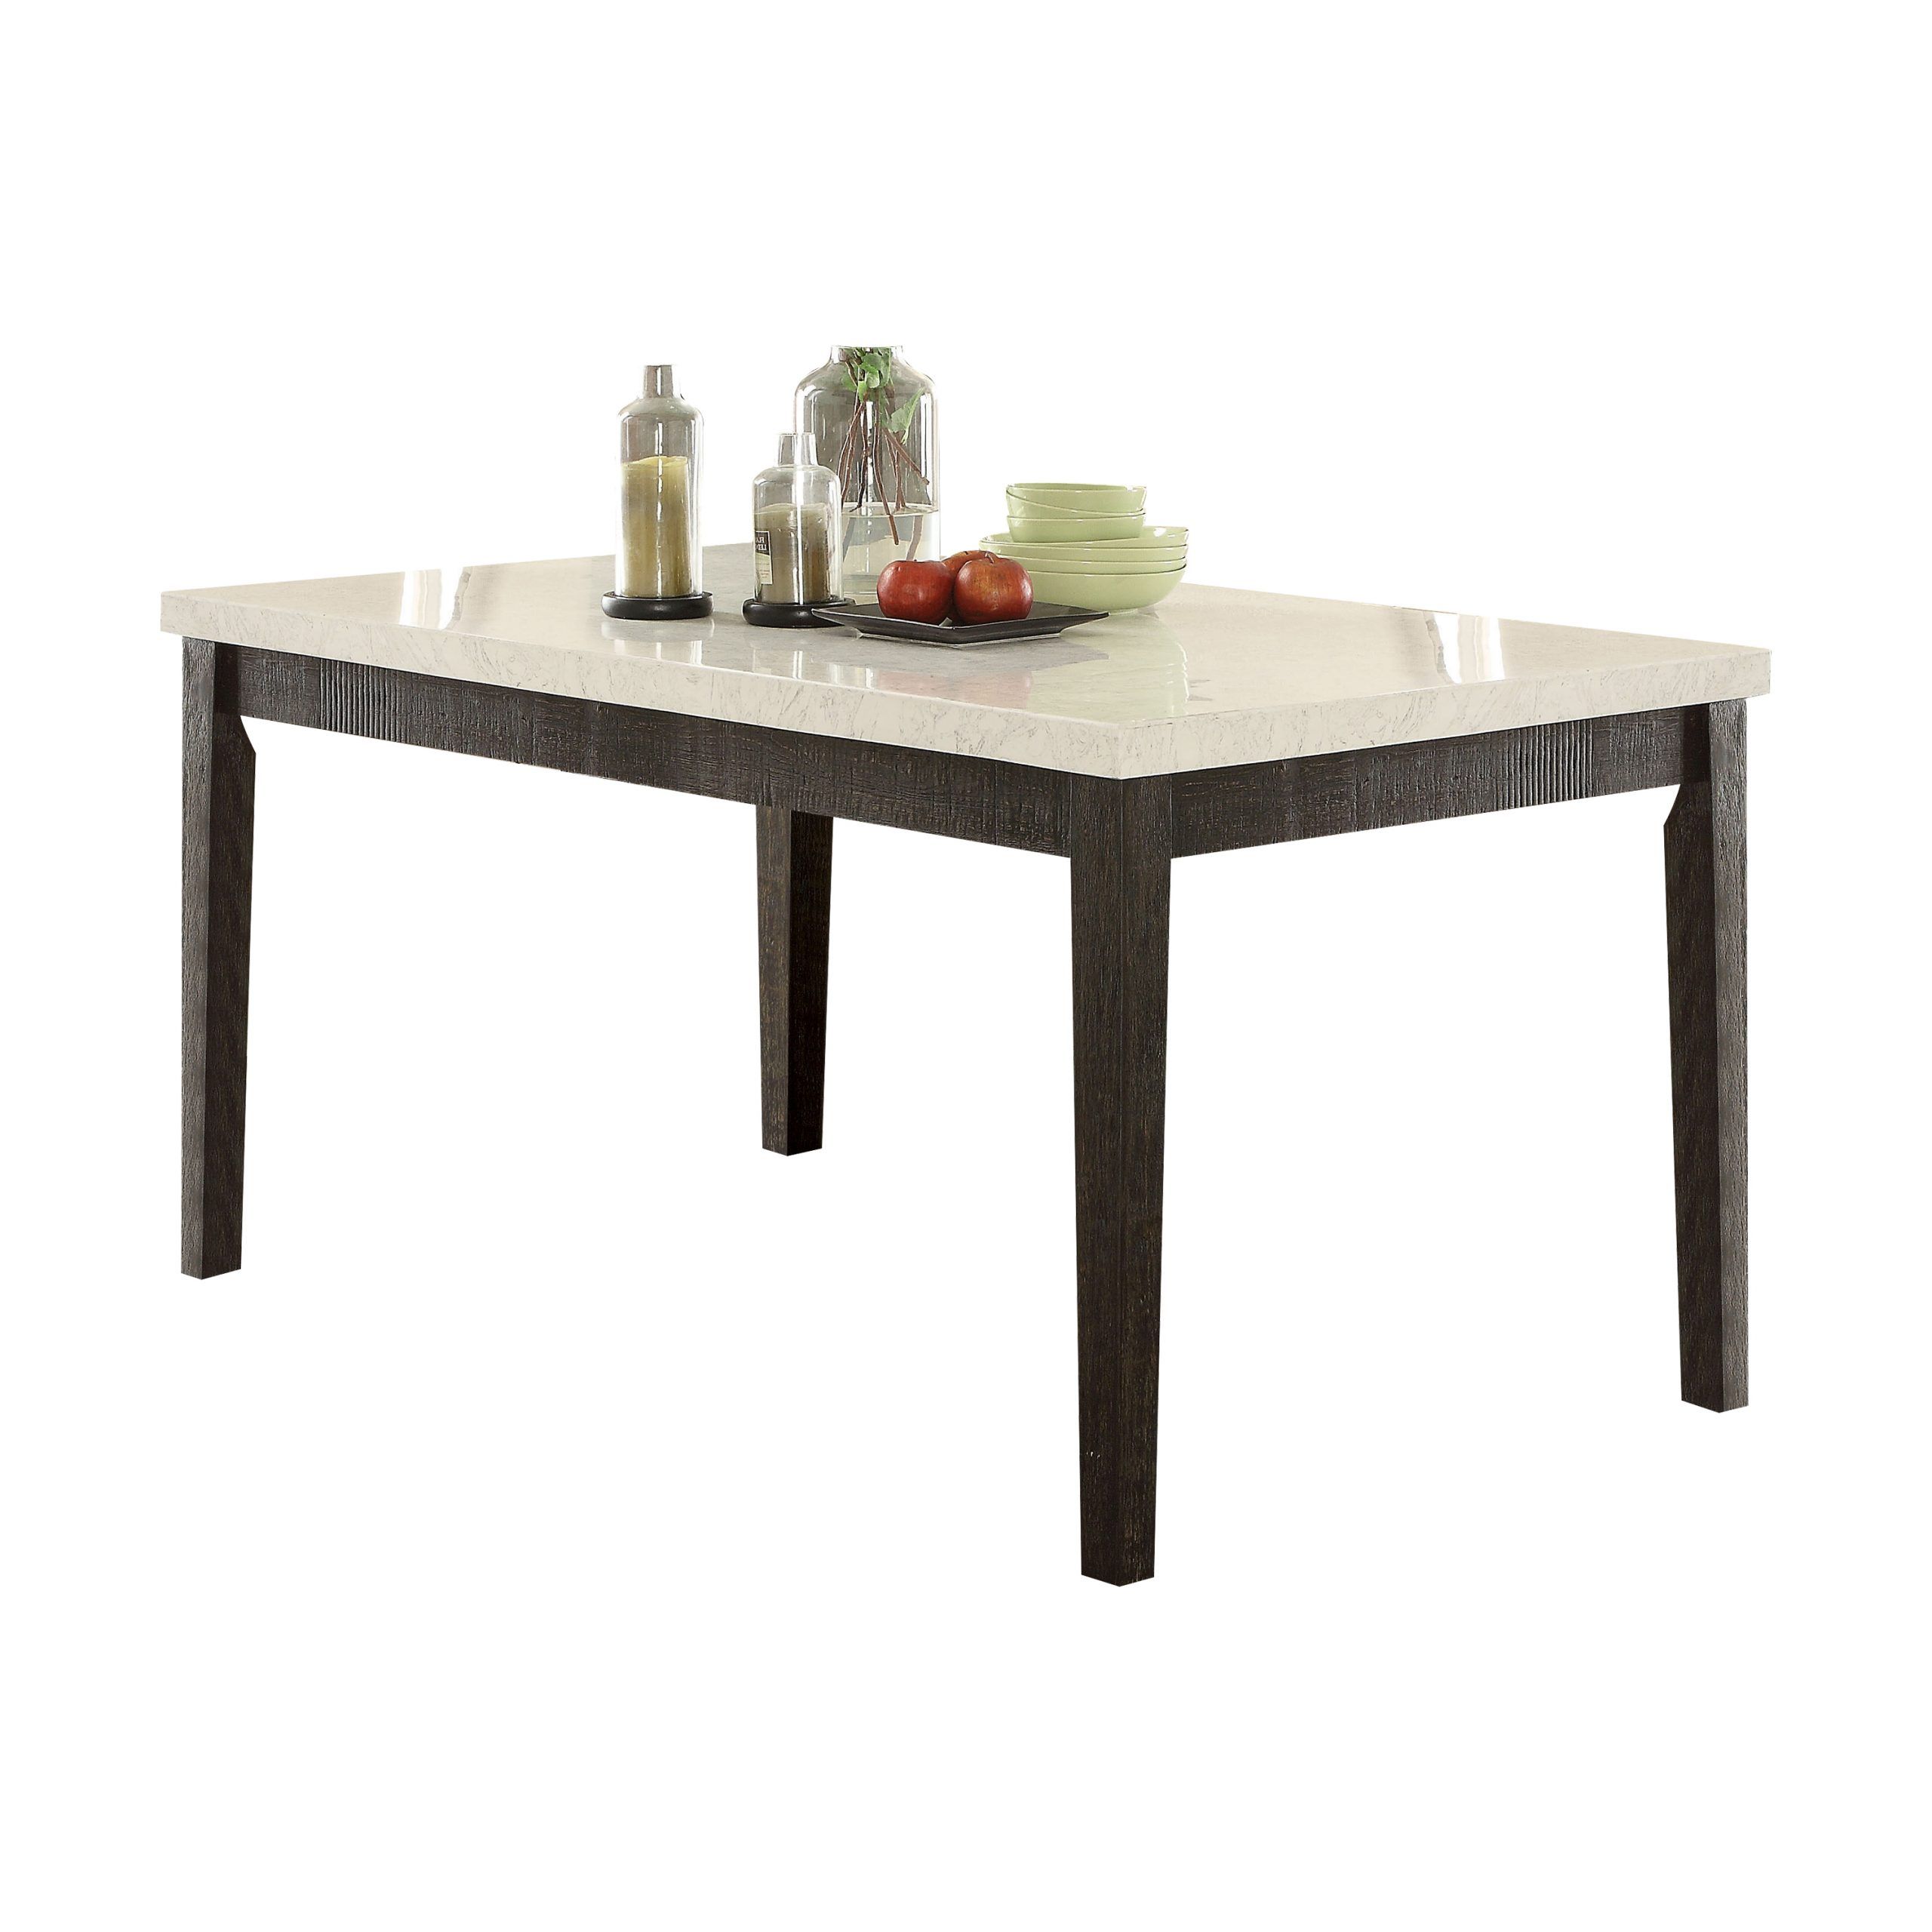 Most Popular Nolan Round Pedestal Dining Tables Throughout Acme Nolan Rectangular Dining Table, White Marble & Weathered Black (View 25 of 25)